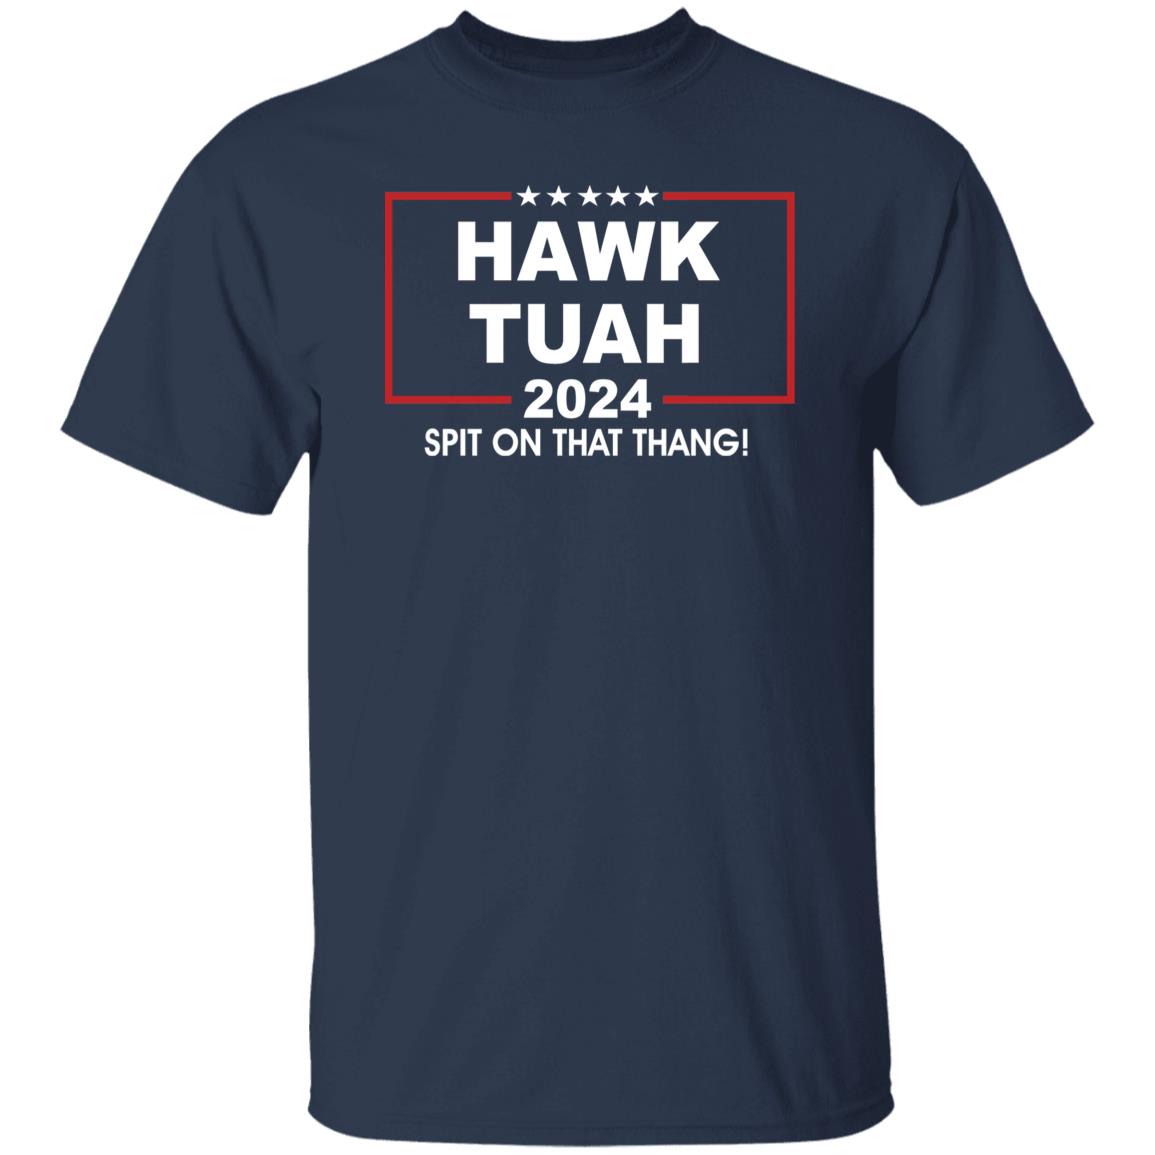 Funny Hawk Tuah Spit on that Thang Presidential Candidate Shirt